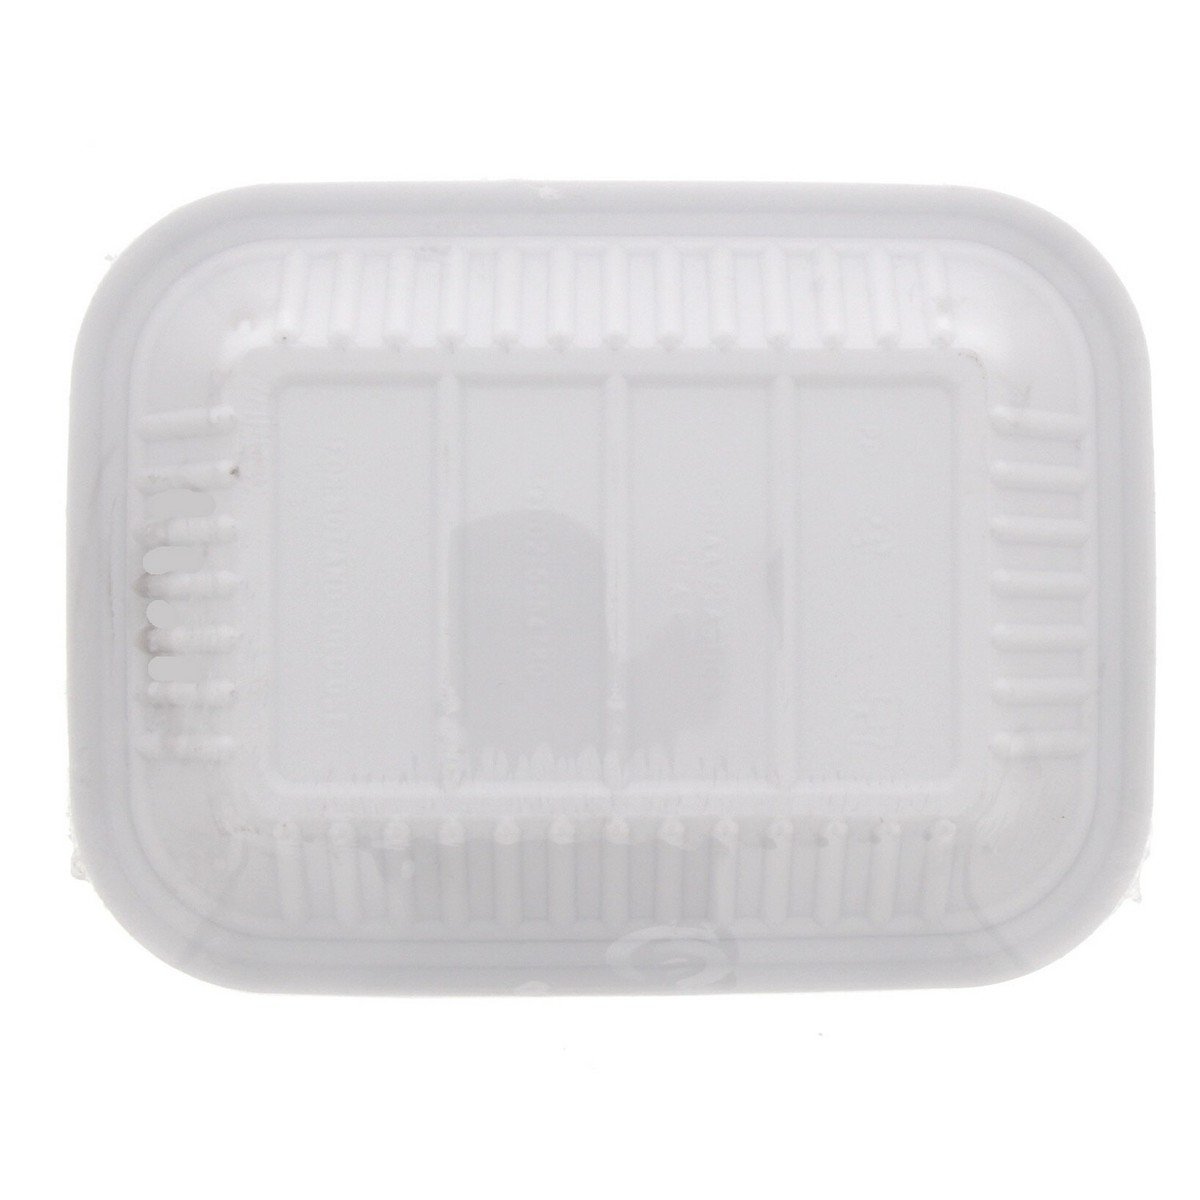 Home Mate Plastic Tray 6.5x4.5inch 250g Approx